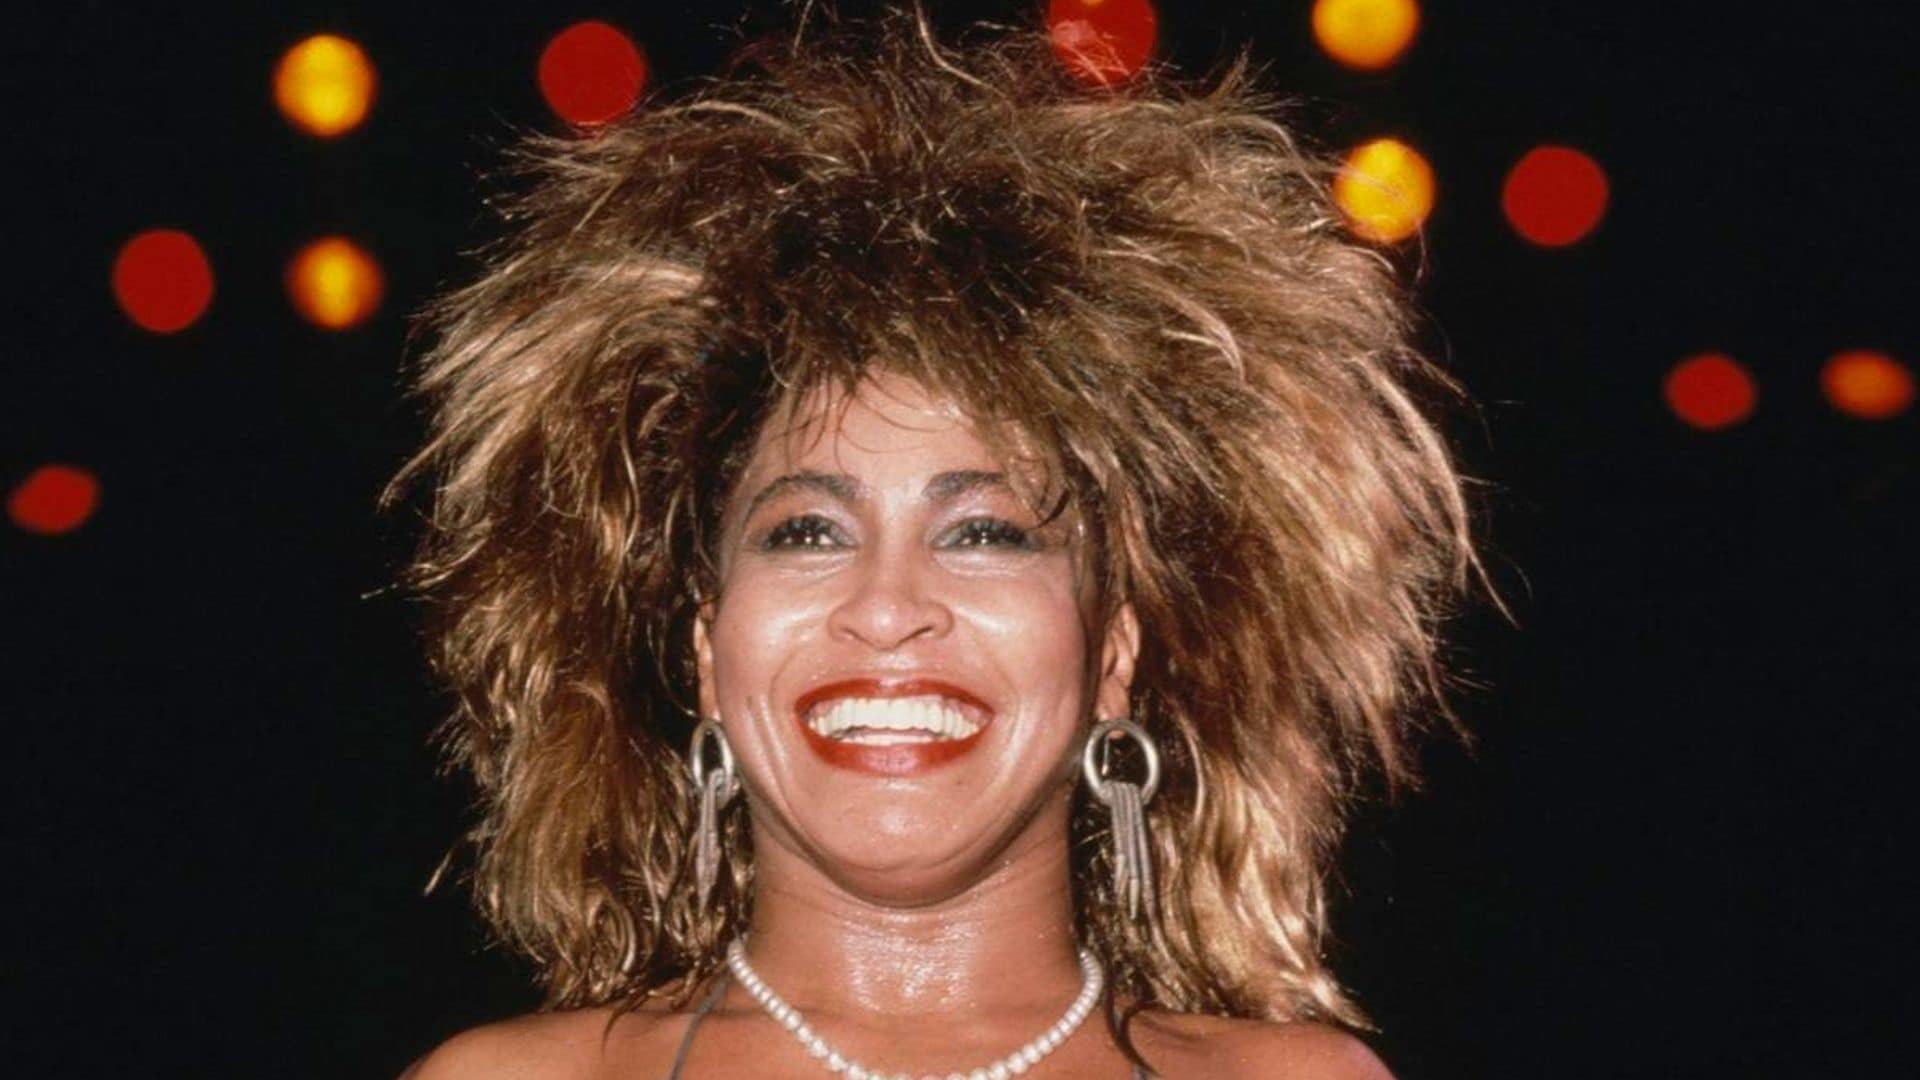 Broadway theater to dim marquee lights for Tina Turner, a traditional Broadway ceremony